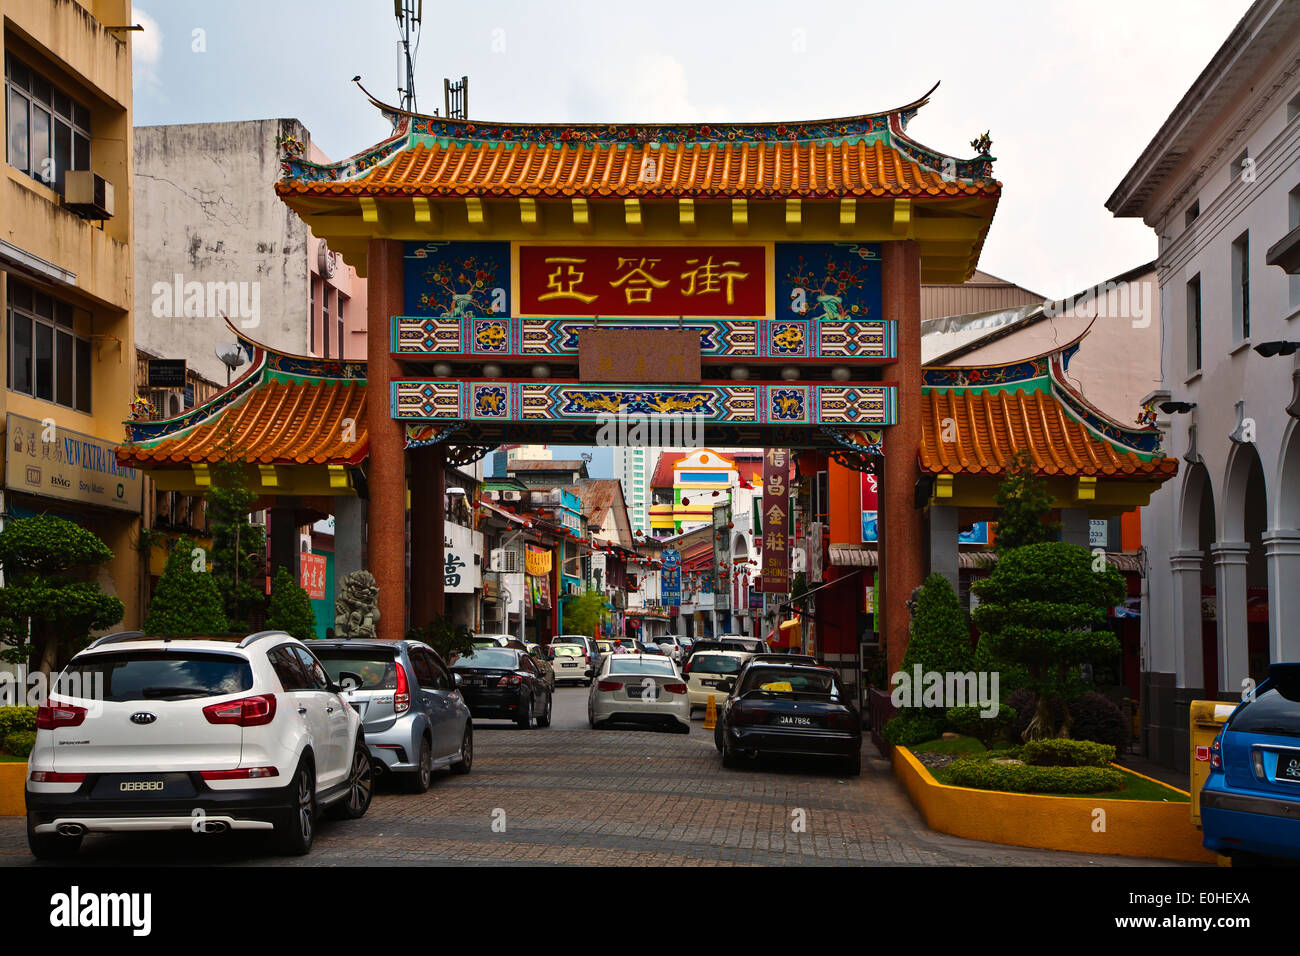 Entrance to CHINA TOWN in the city of KUCHING - SARAWAK, BORNEO